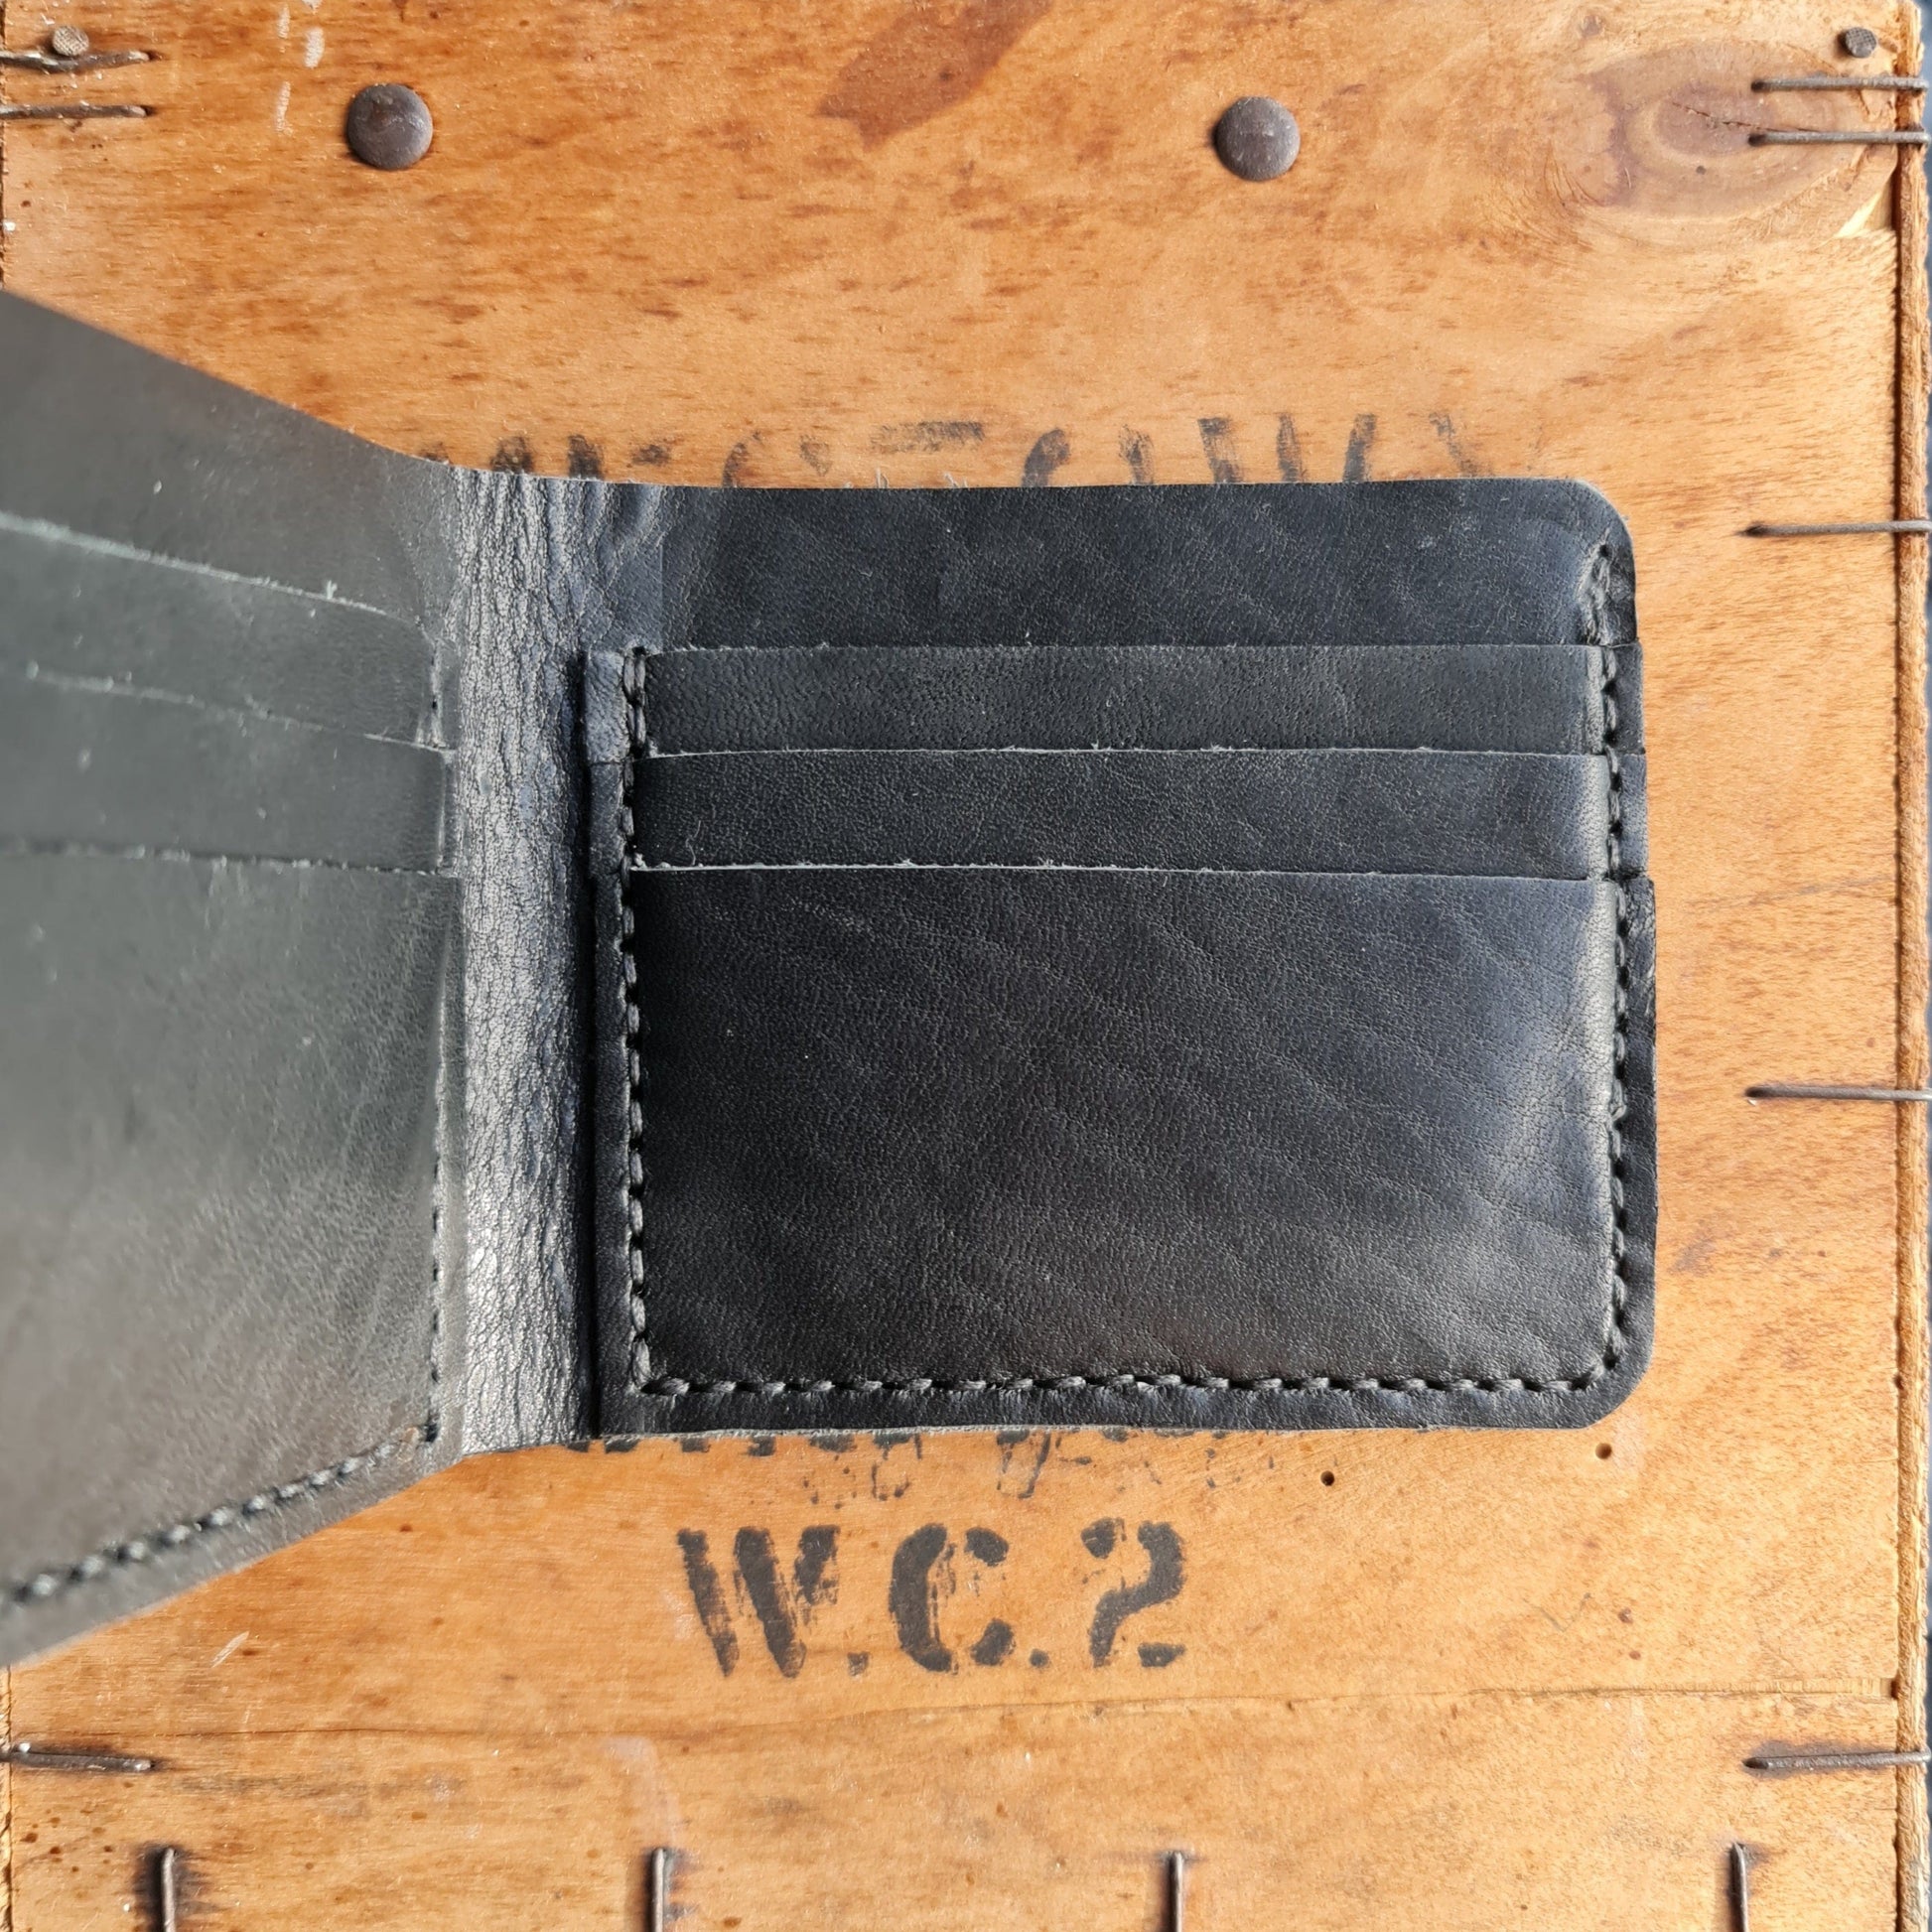 No. 2 Frontiersman Leather Bifold Wallet, Horween Black Dublin Leather, Inside Right